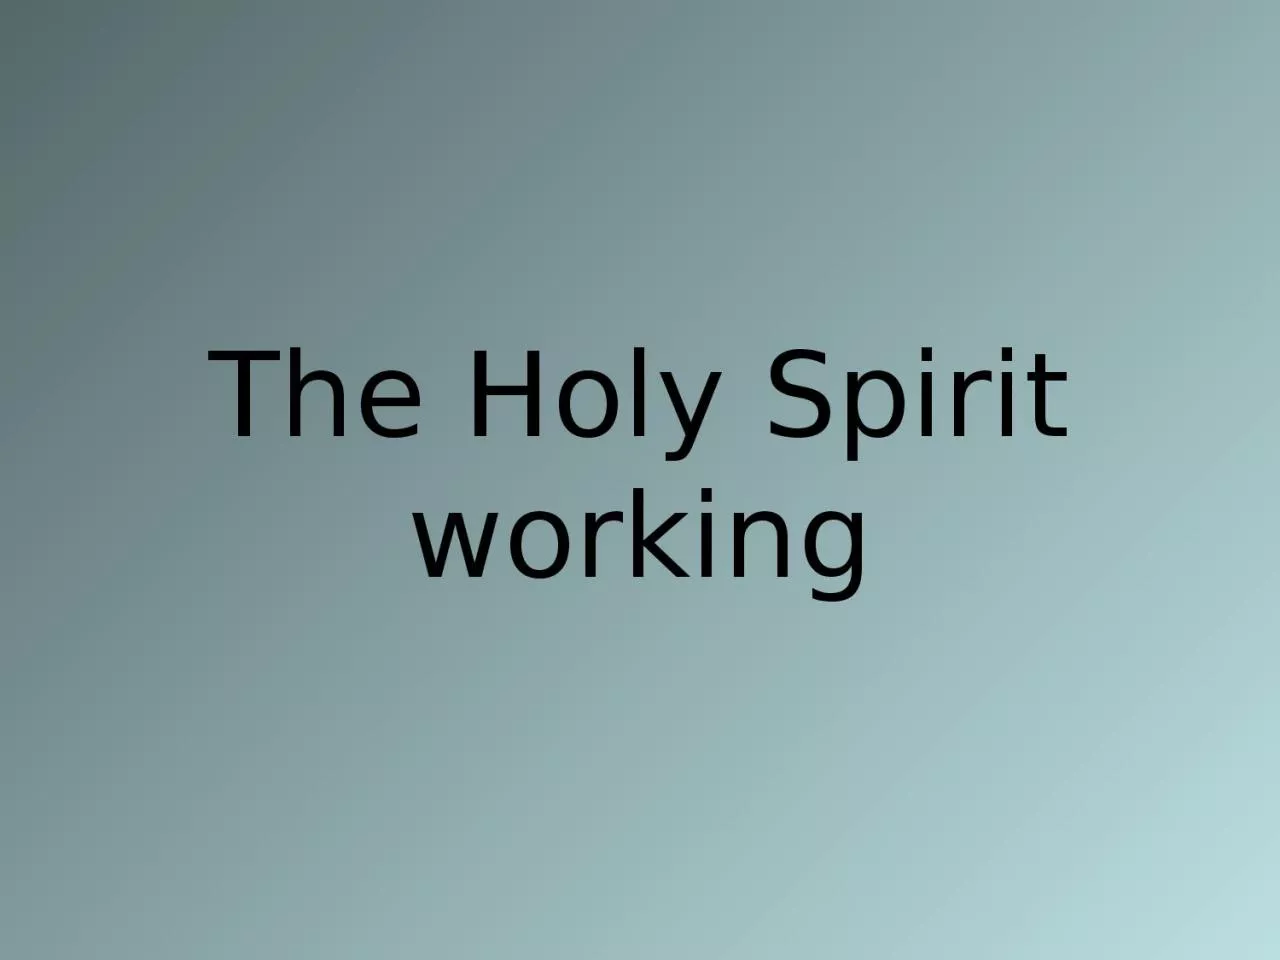 The Holy Spirit working Act 2:38  Then Peter said to them, Repent and be baptized, every